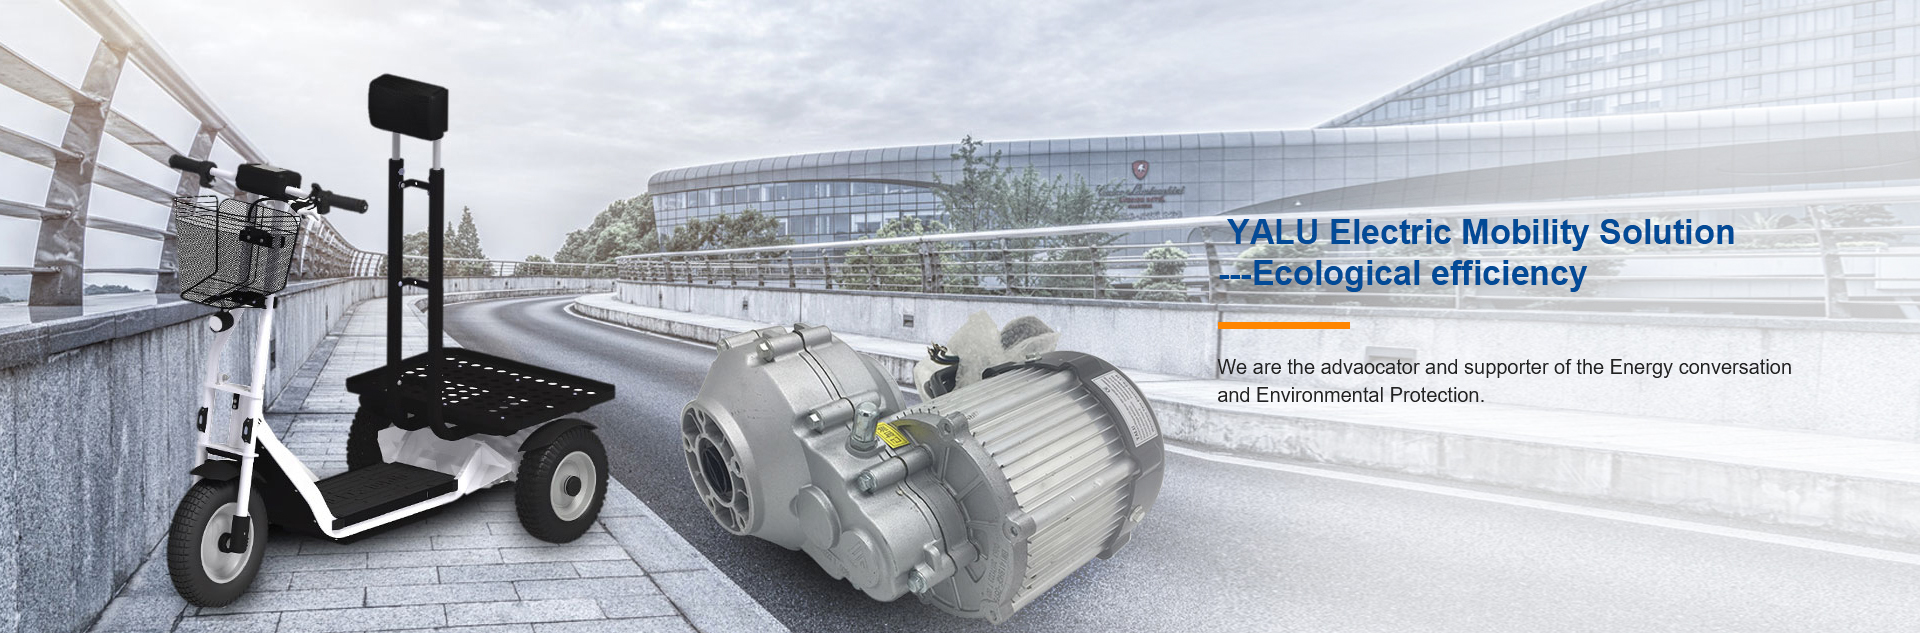 YALU Electric Mobility Solution | Ecological efficiency